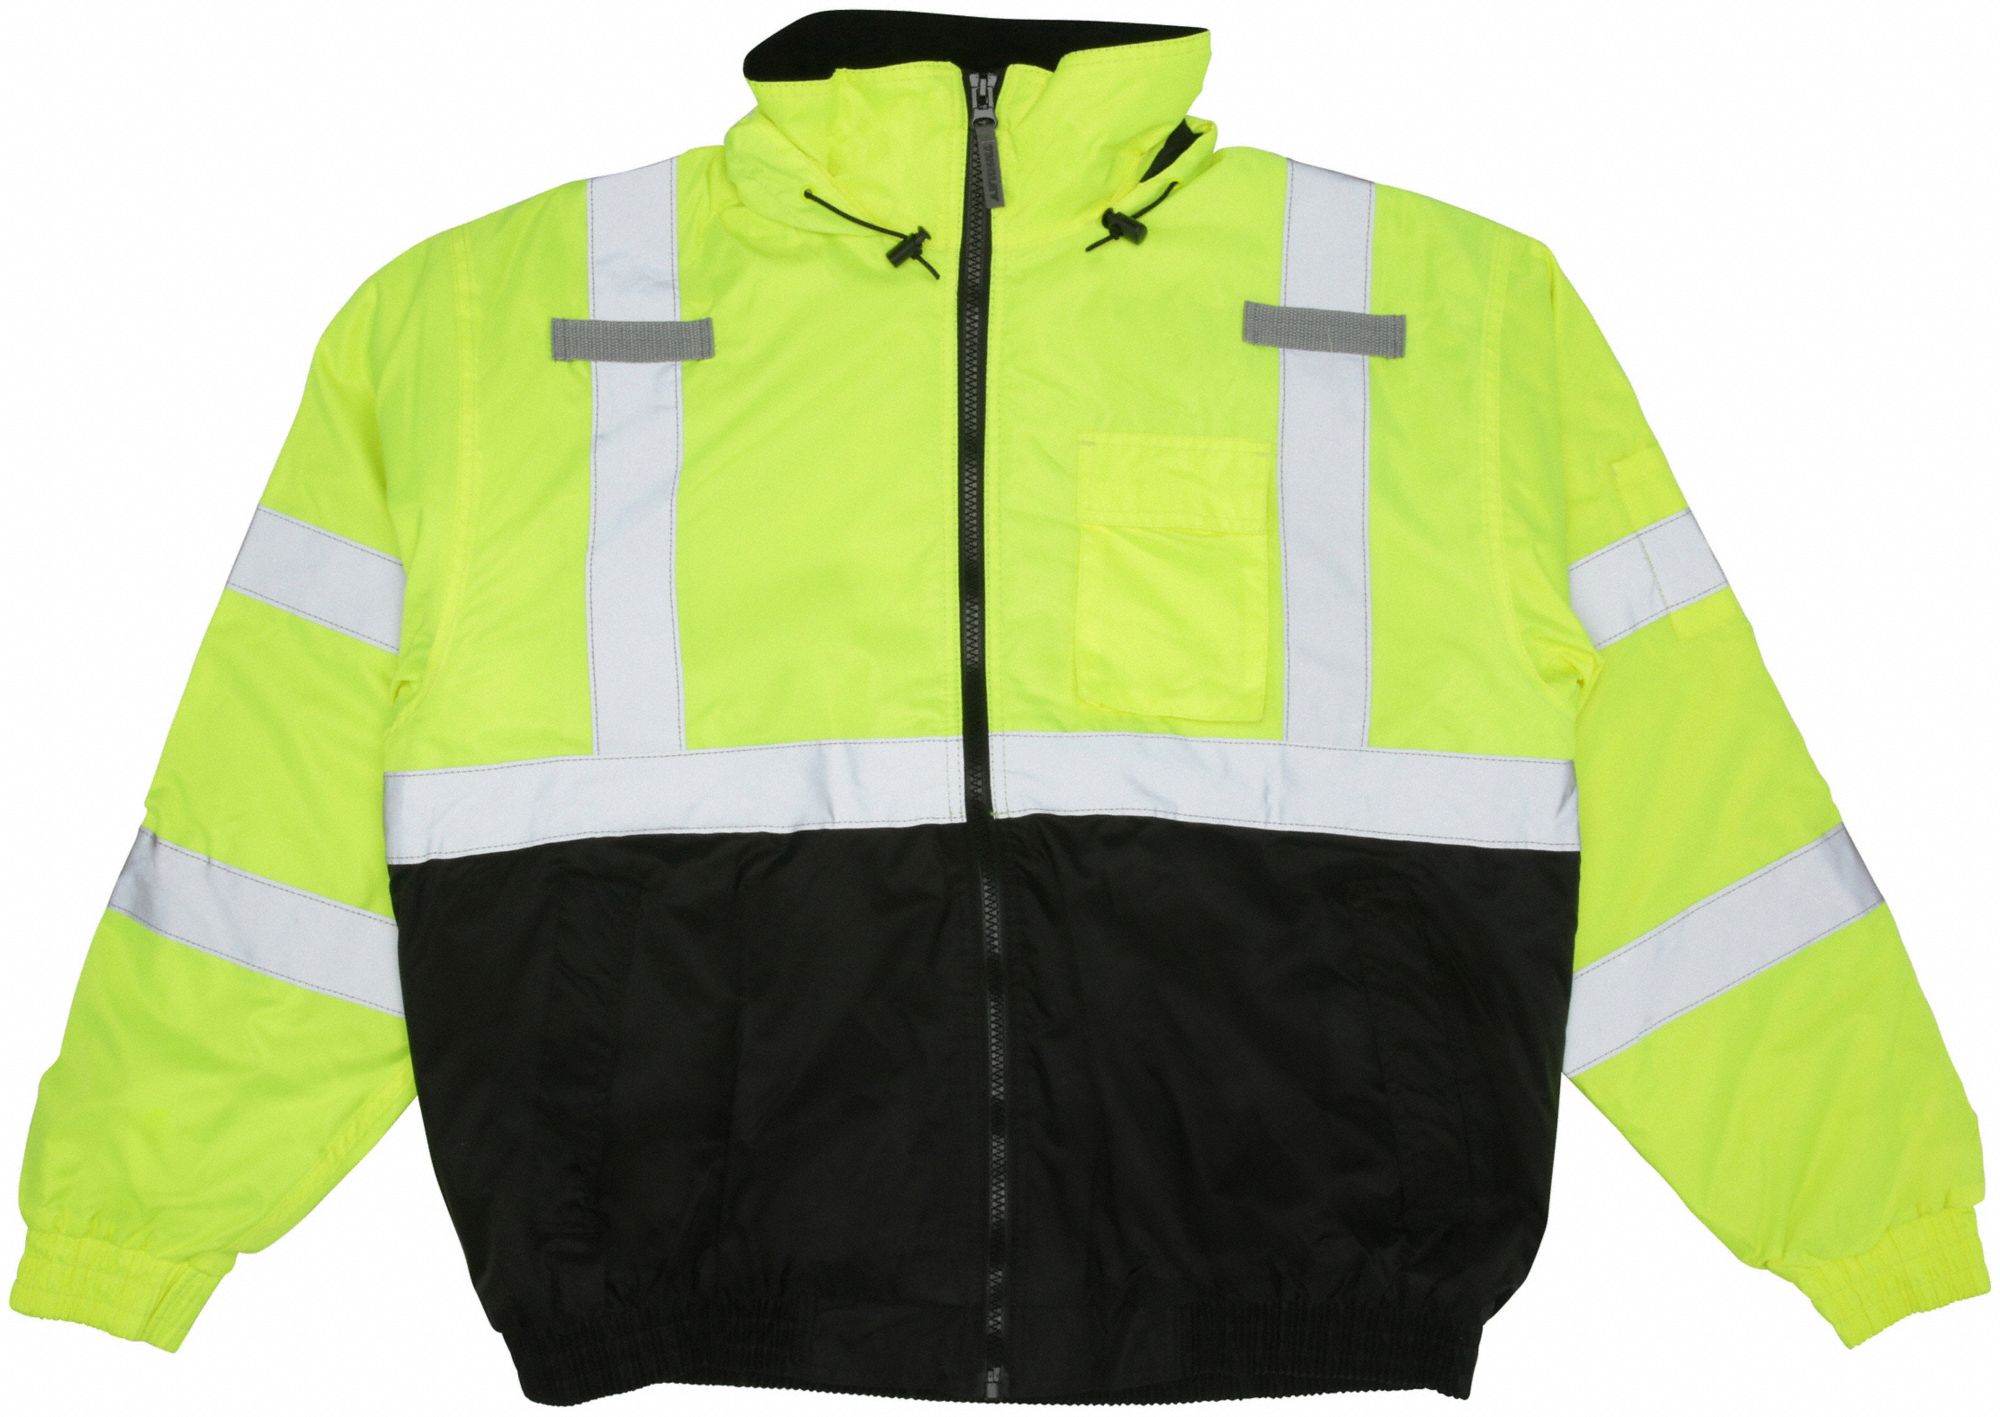 High-Visibility Clothing Standards - Grainger KnowHow